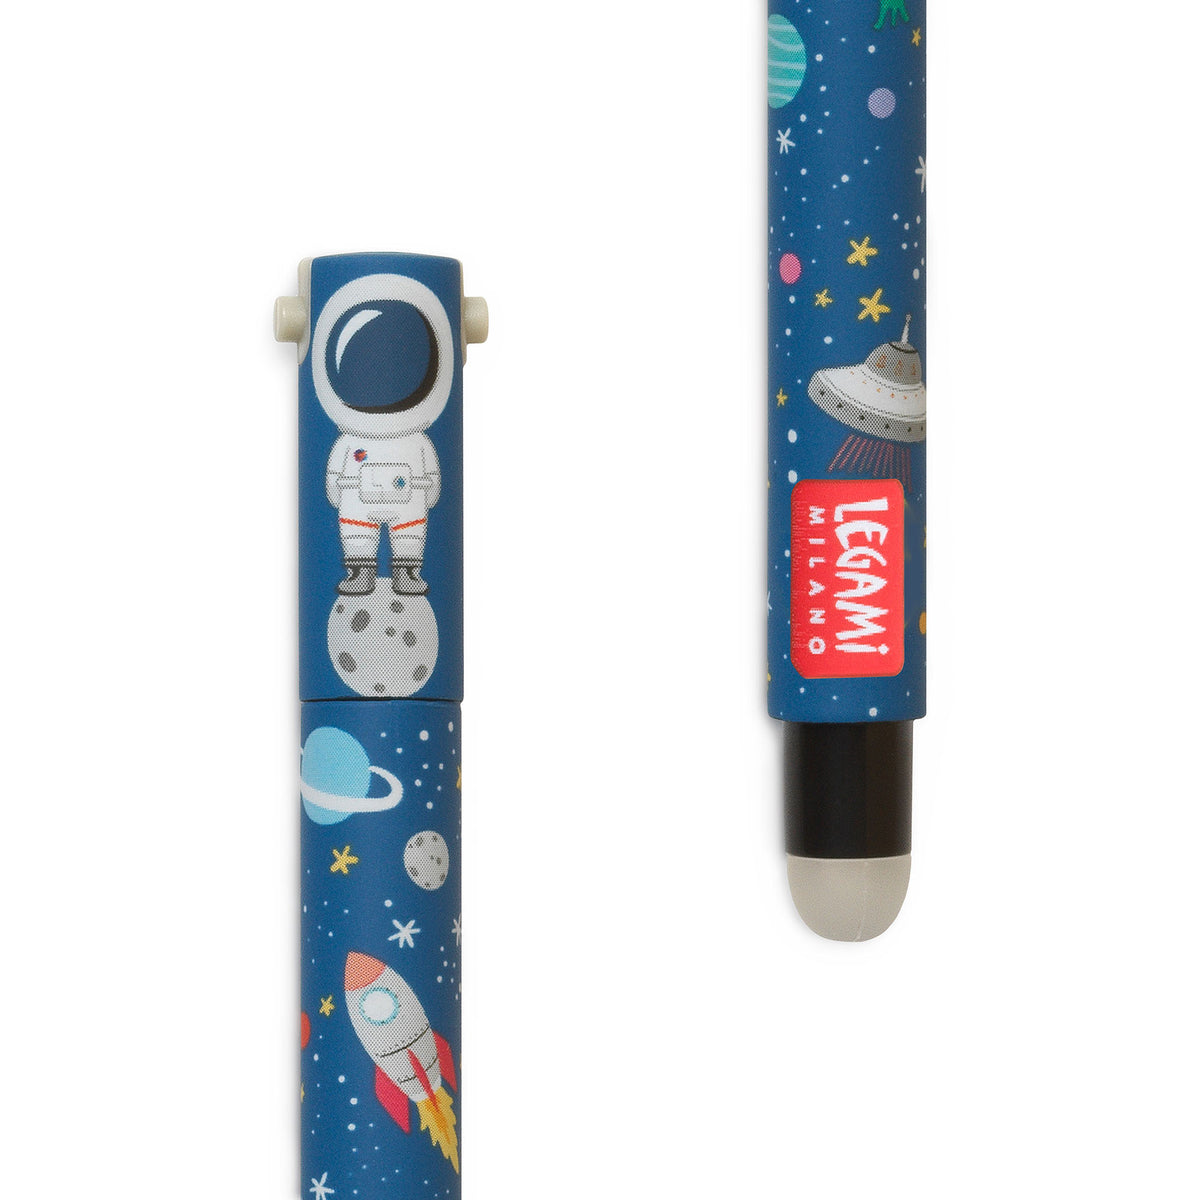 Image of an erasable pen lid and rubber with a space and astronaut theme.